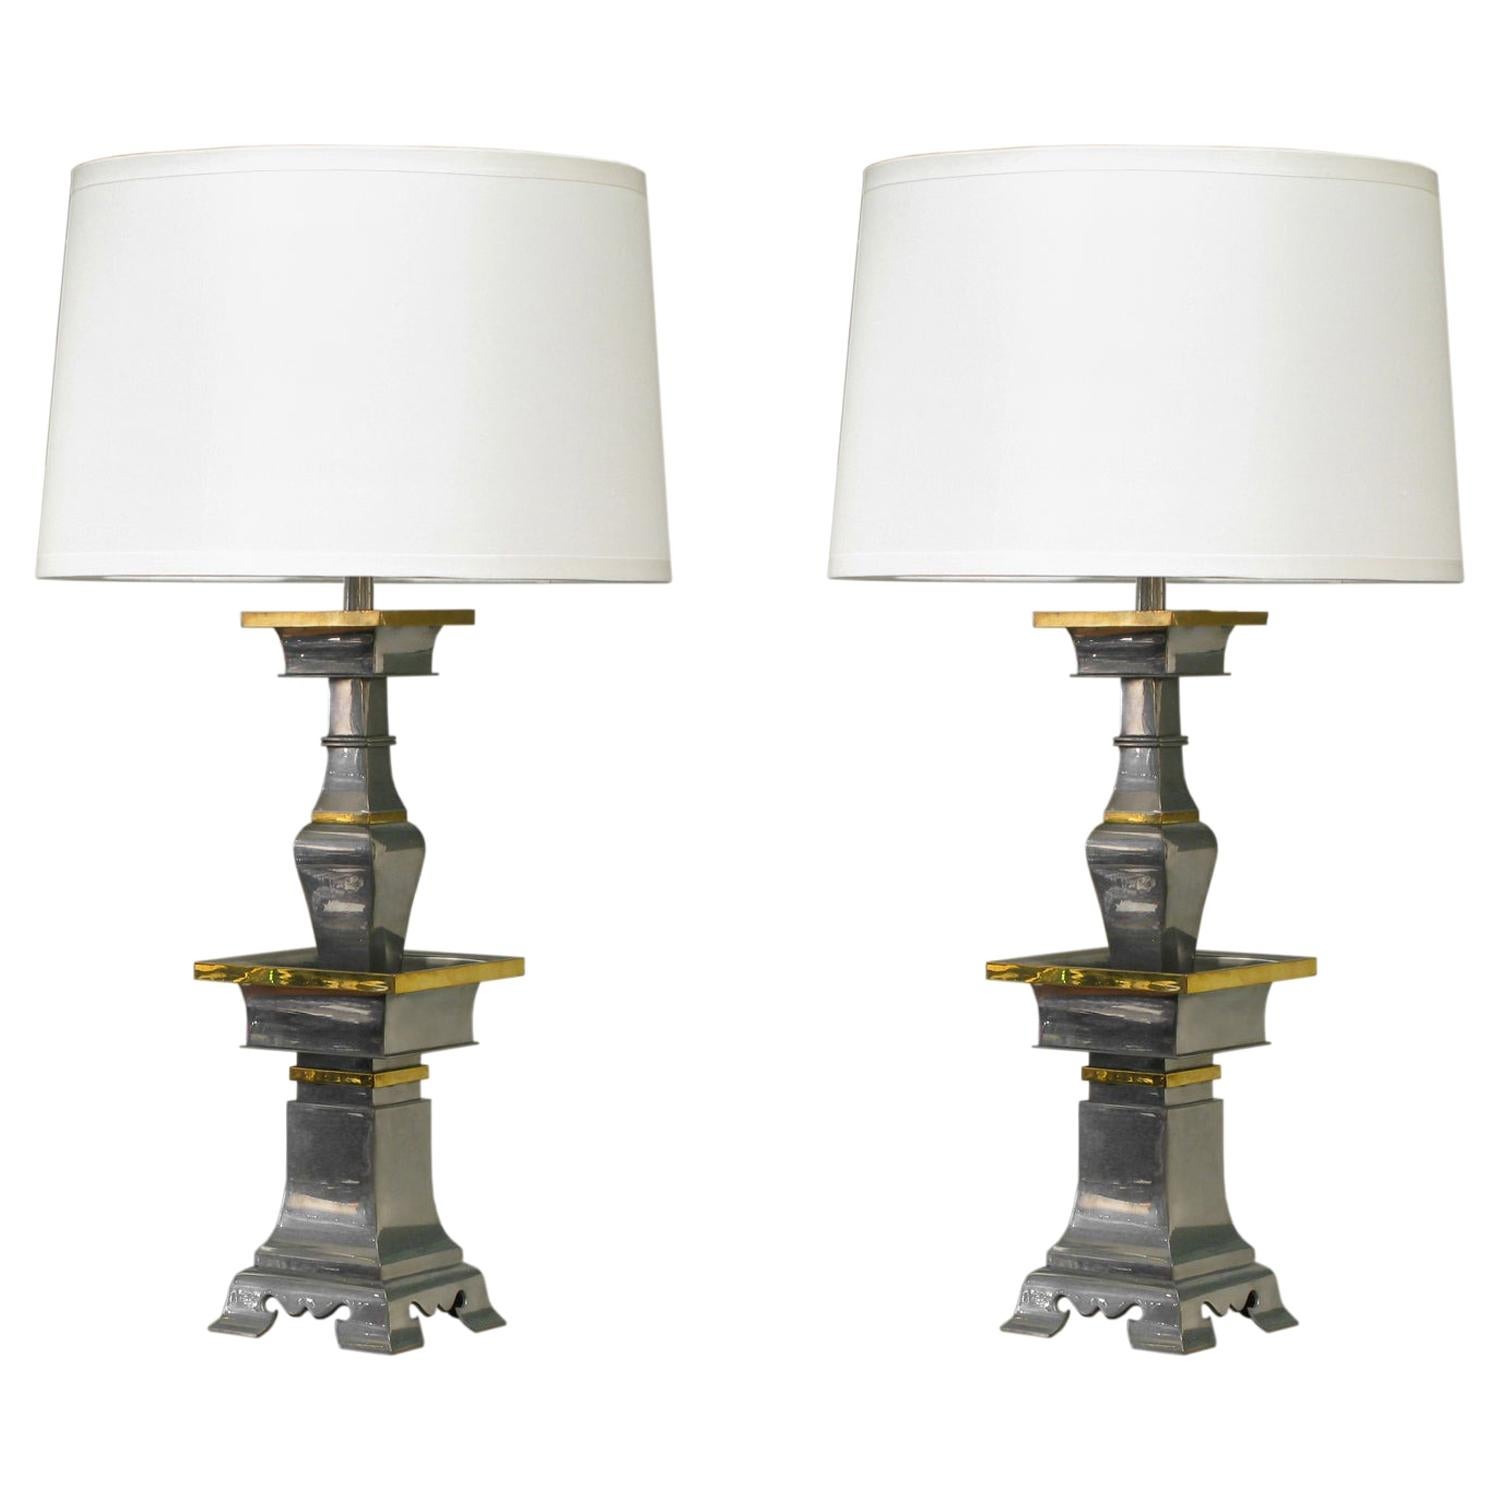 Pair of Sculptural Table Lamps in Pewter and Brass, 1960s